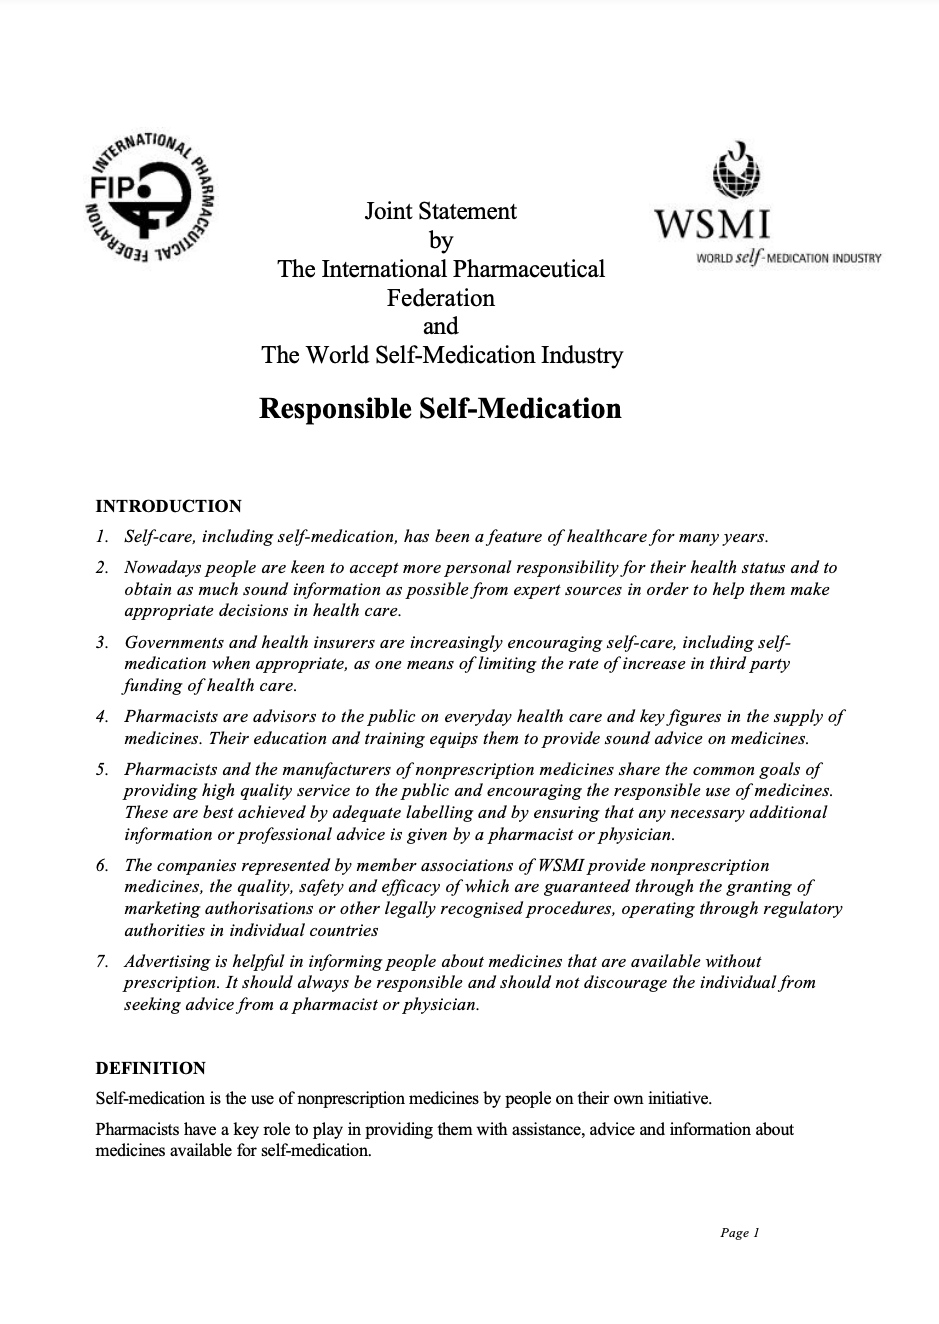 Joint Statement by the International Pharmaceutical Federation (FIP) and The World Self-Medication Industry (WSMI): Responsible Self-Medication (1999) Thumbnail